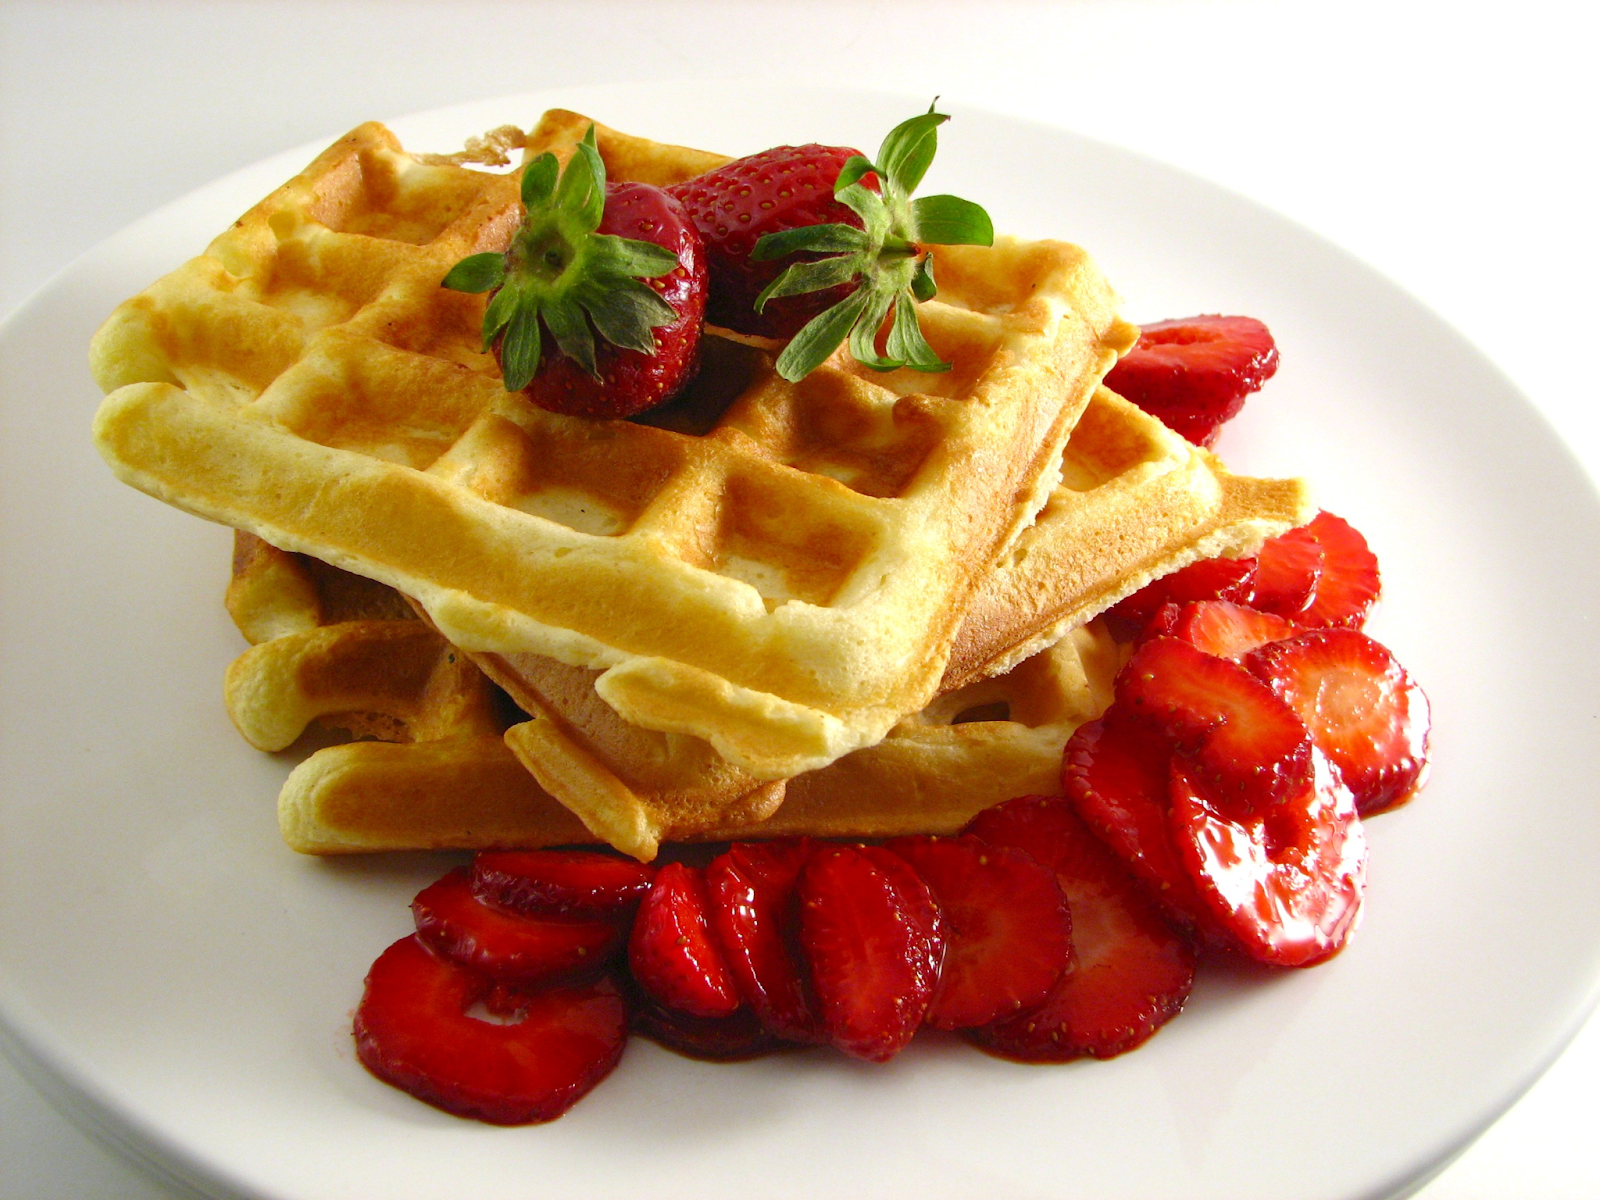 Ingredients determine the quality of waffles